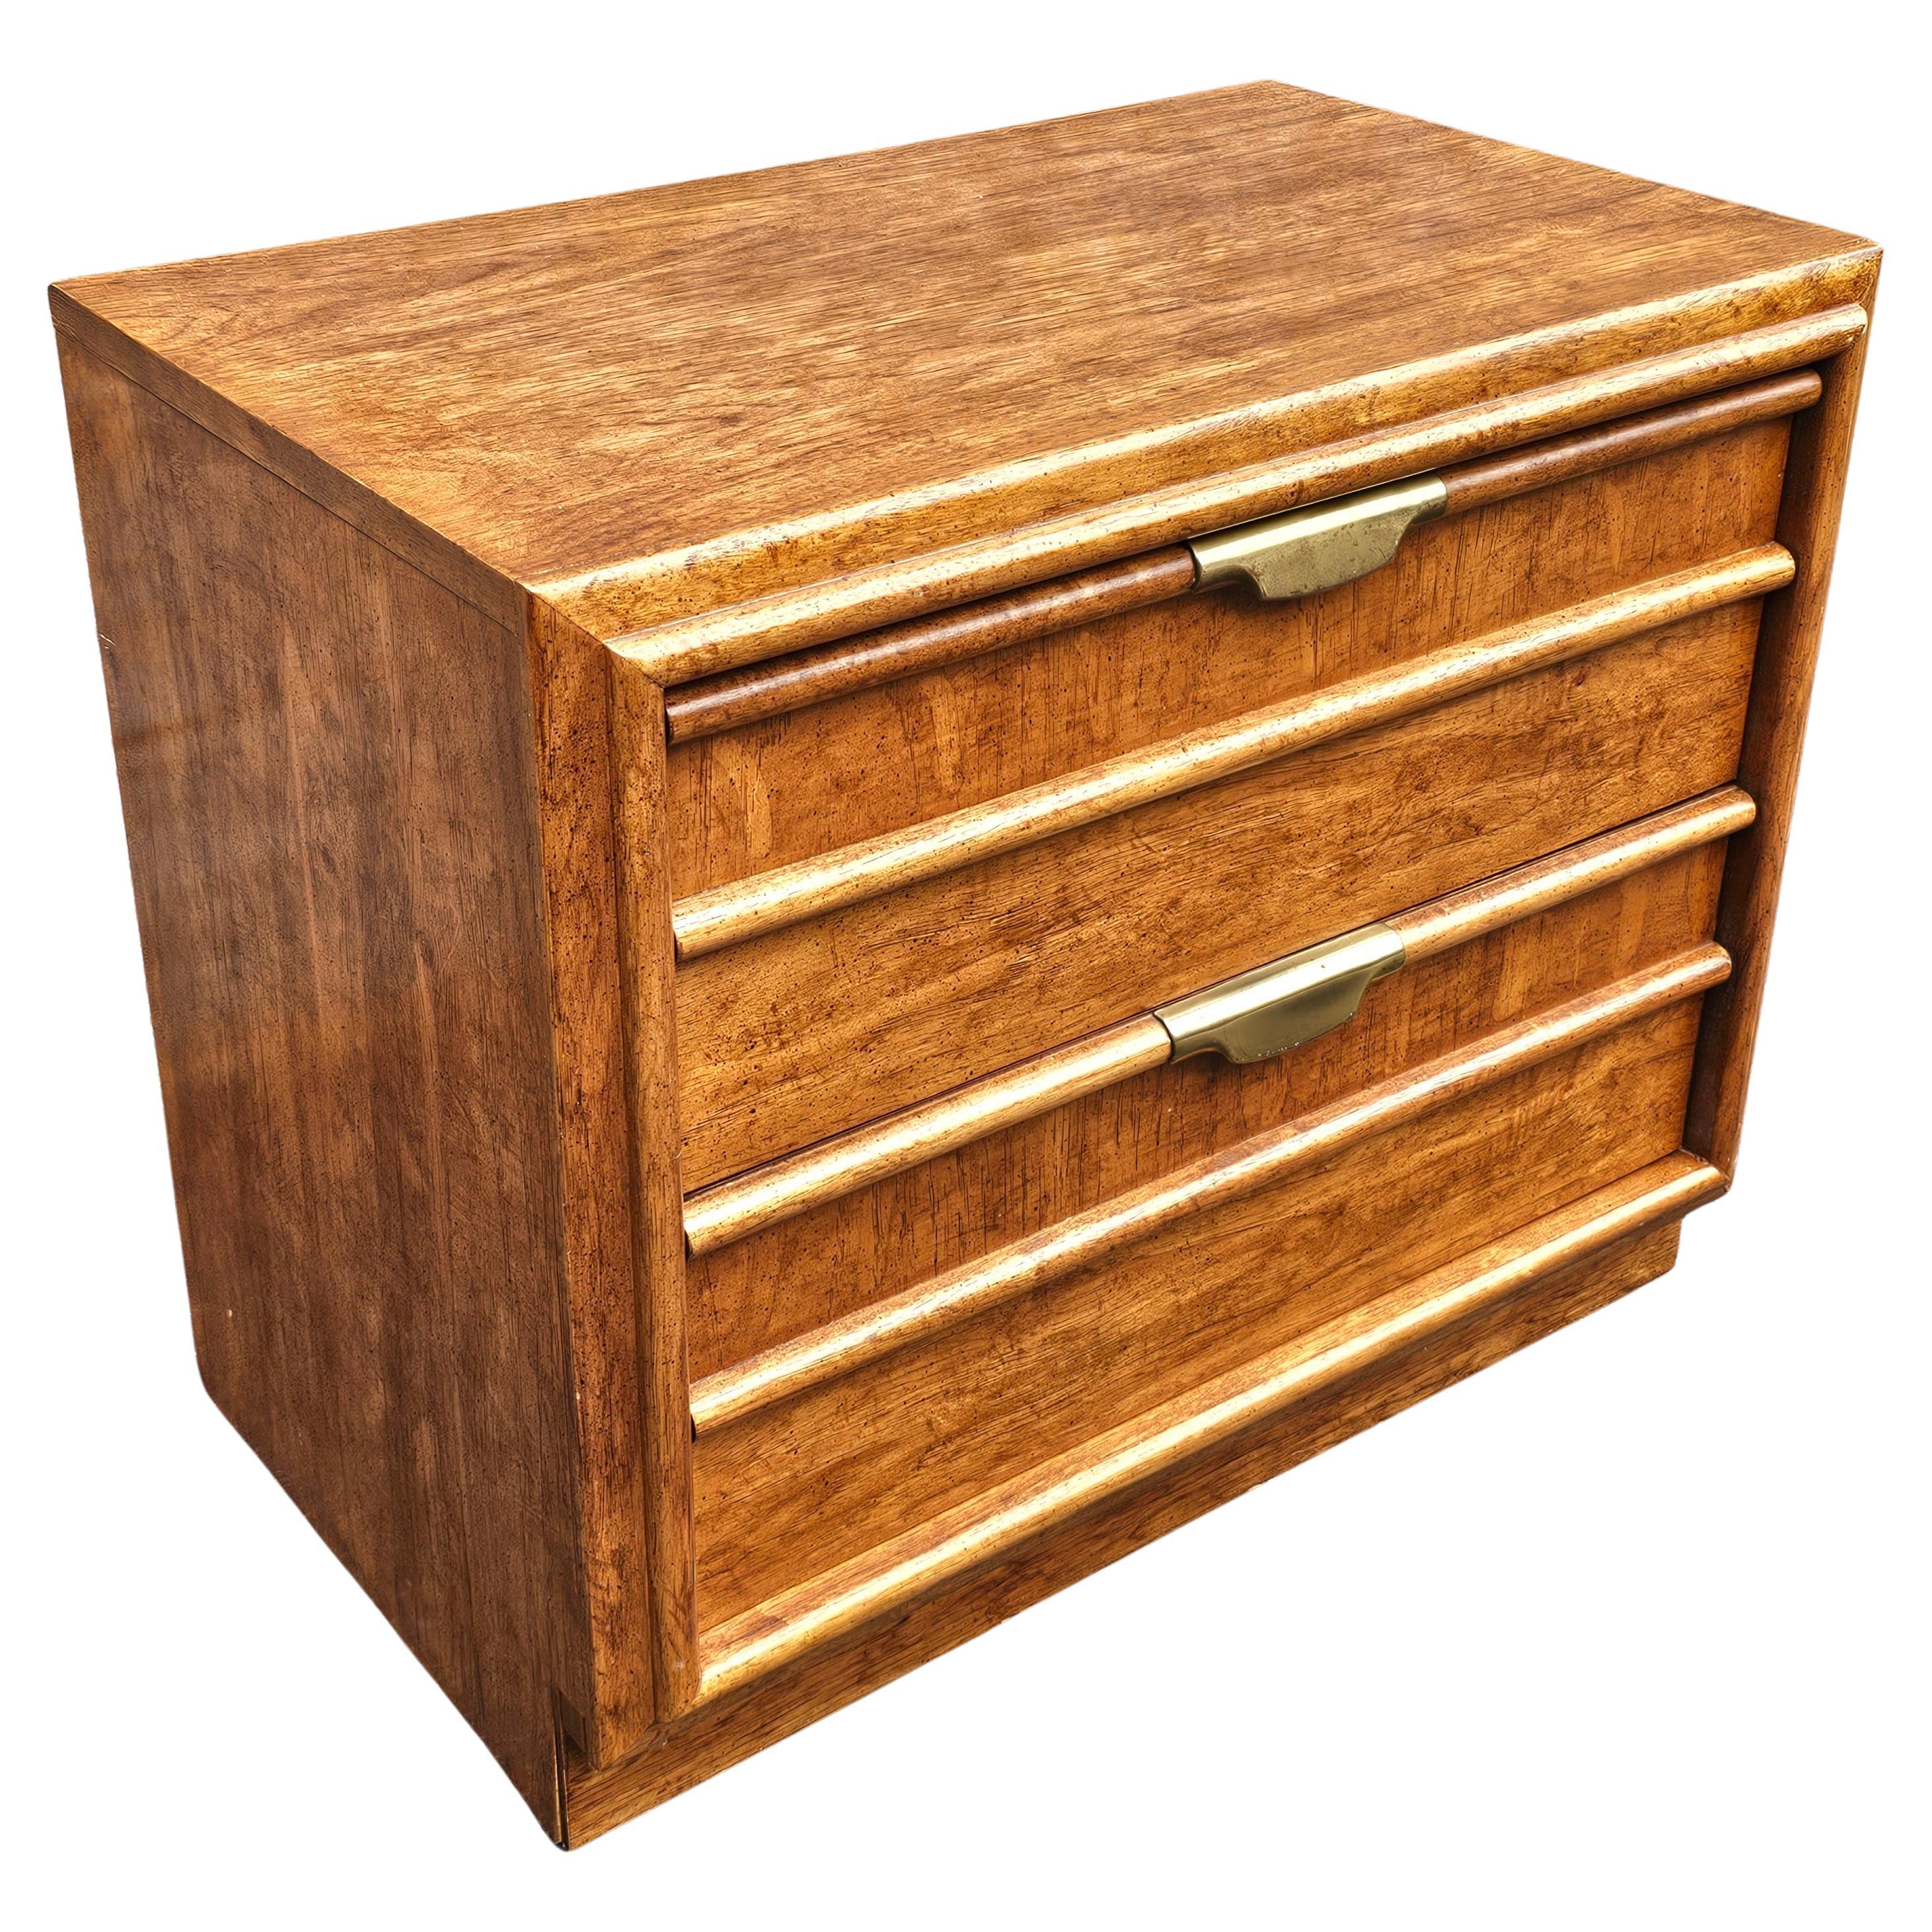 Mid 20th Century Dixie Furniture Nightstand with 2 dovetail joints drawers and brass pull. Measures 26